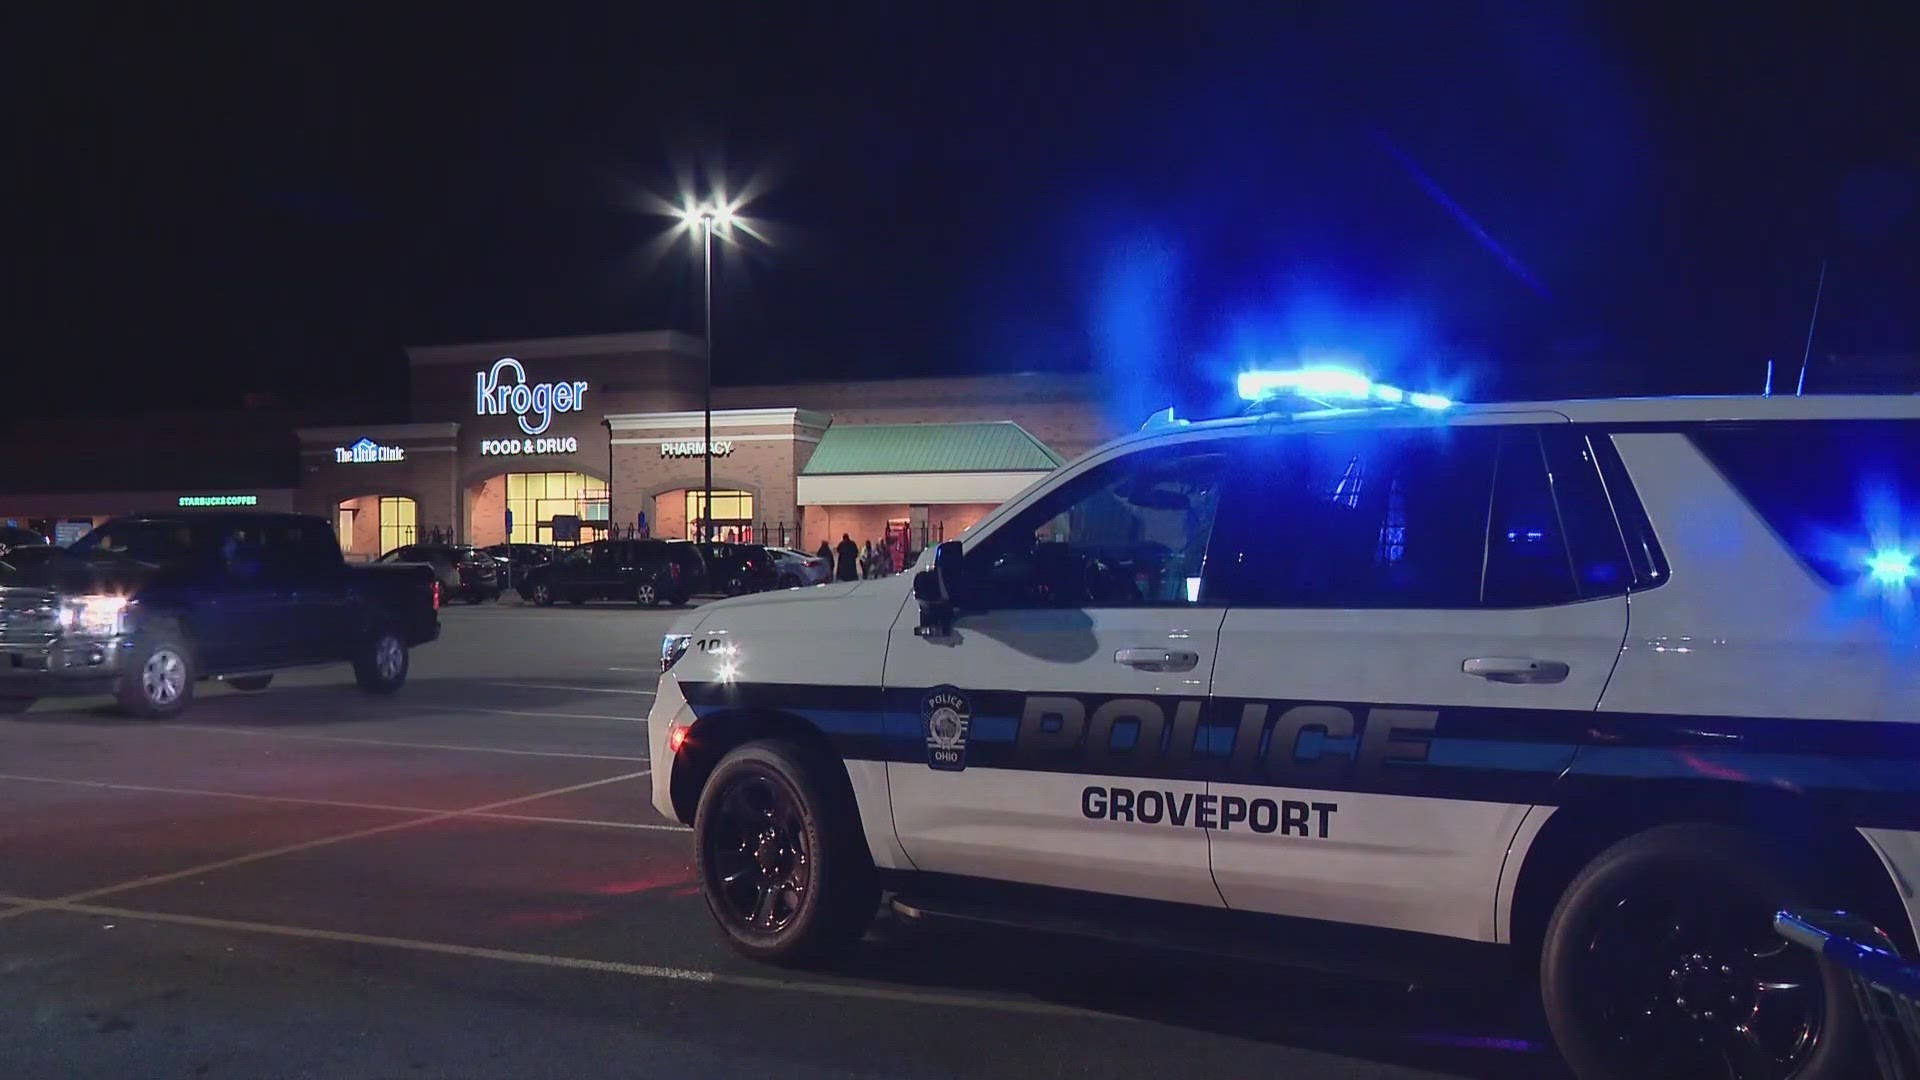 Officers were called to the Kroger, located at 6011 Groveport Road, just before 6:10 p.m.